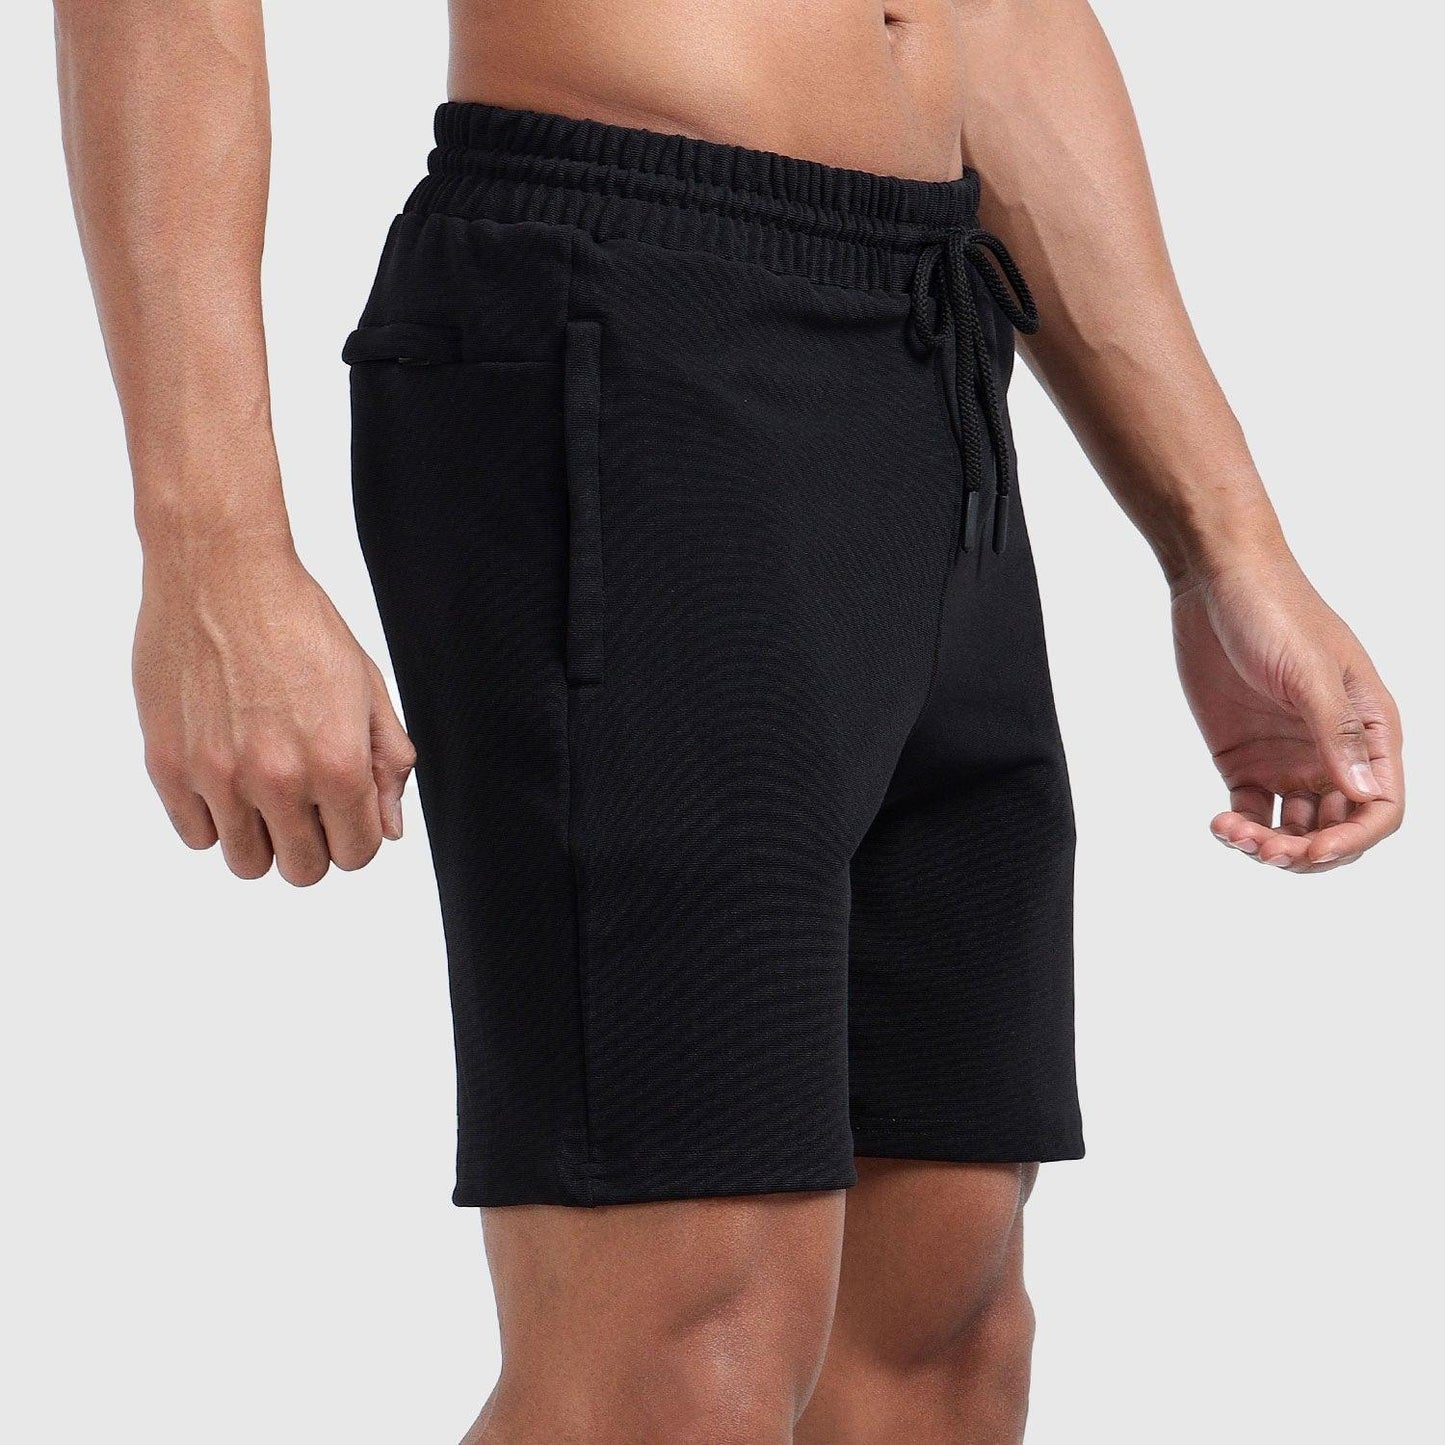 Denmonk's fashionable Trekready black shorts for men will boost your level of gym fitness.